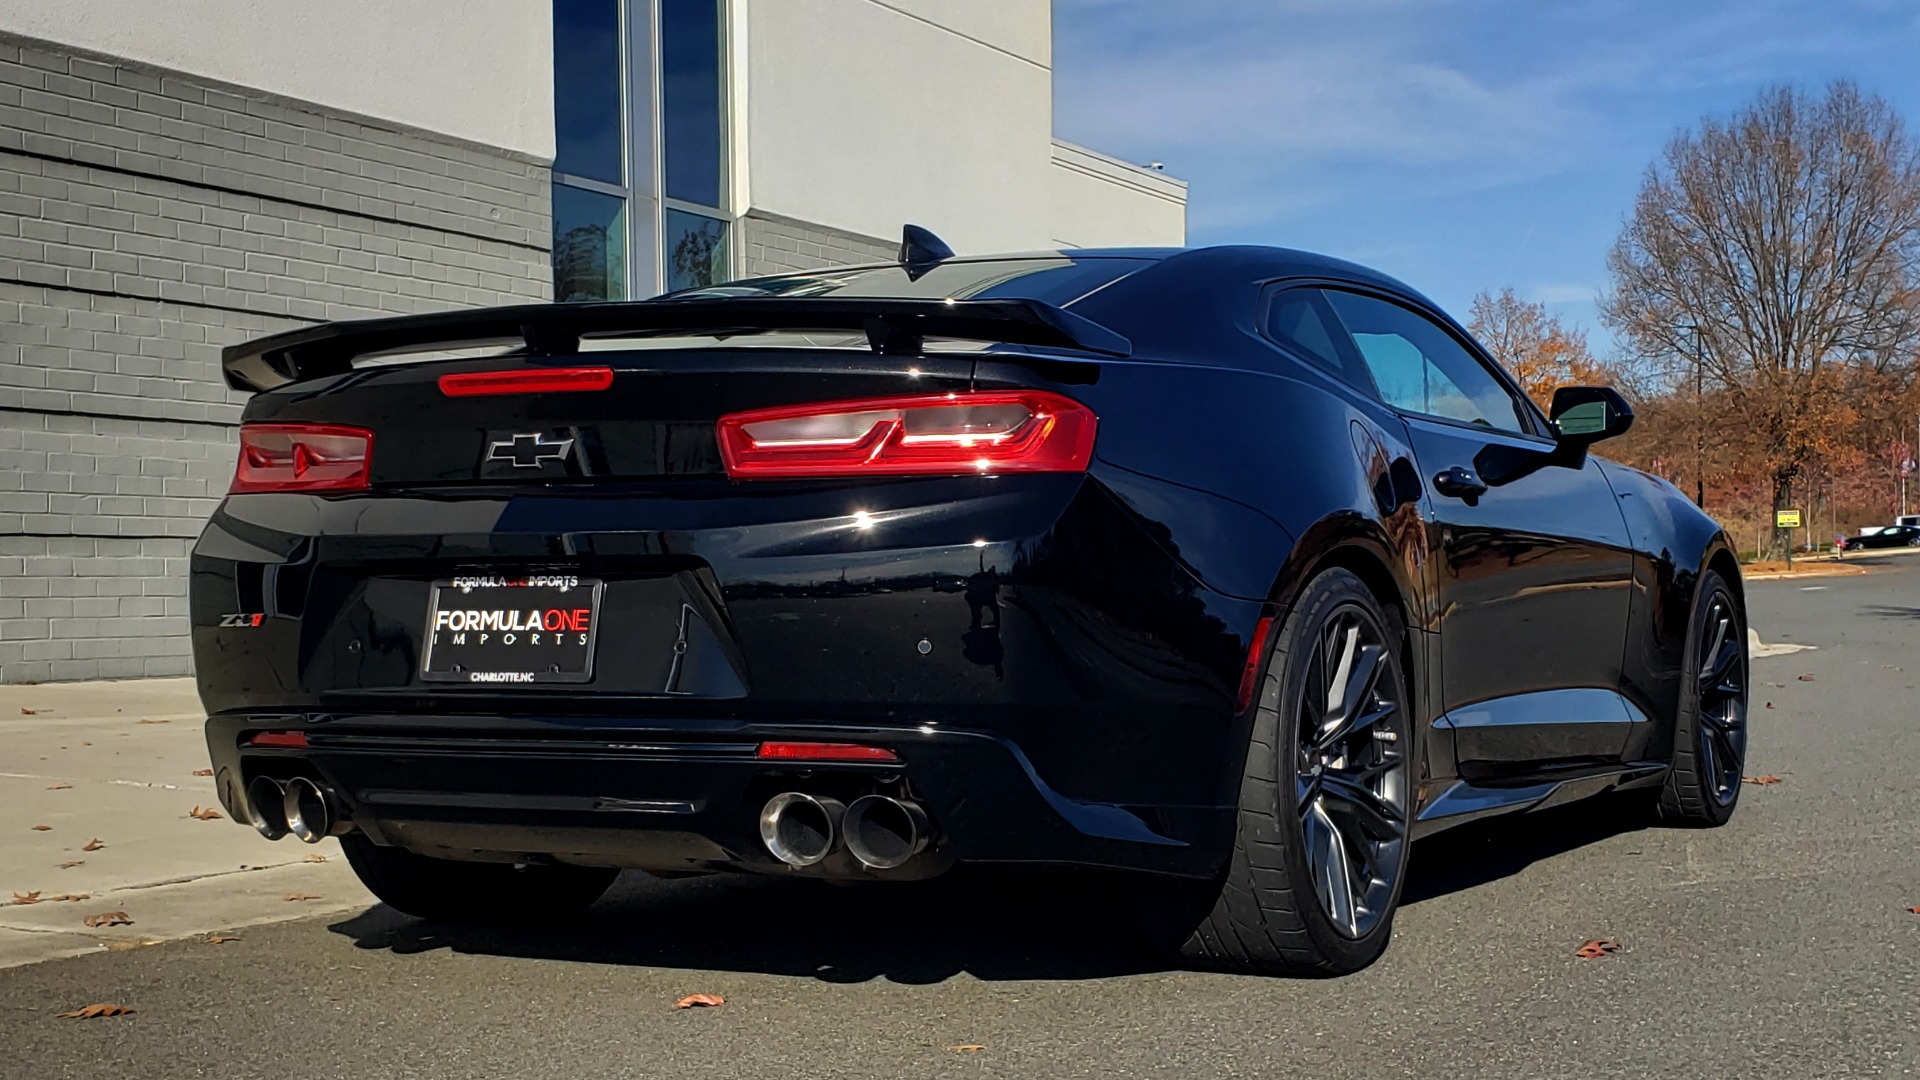 Used 2017 Chevrolet CAMARO ZL1 COUPE / 6.2L SC LT4 V8 (650HP) / 6-SPD MAN / NAV / BOSE / REARVIEW for sale Sold at Formula Imports in Charlotte NC 28227 9